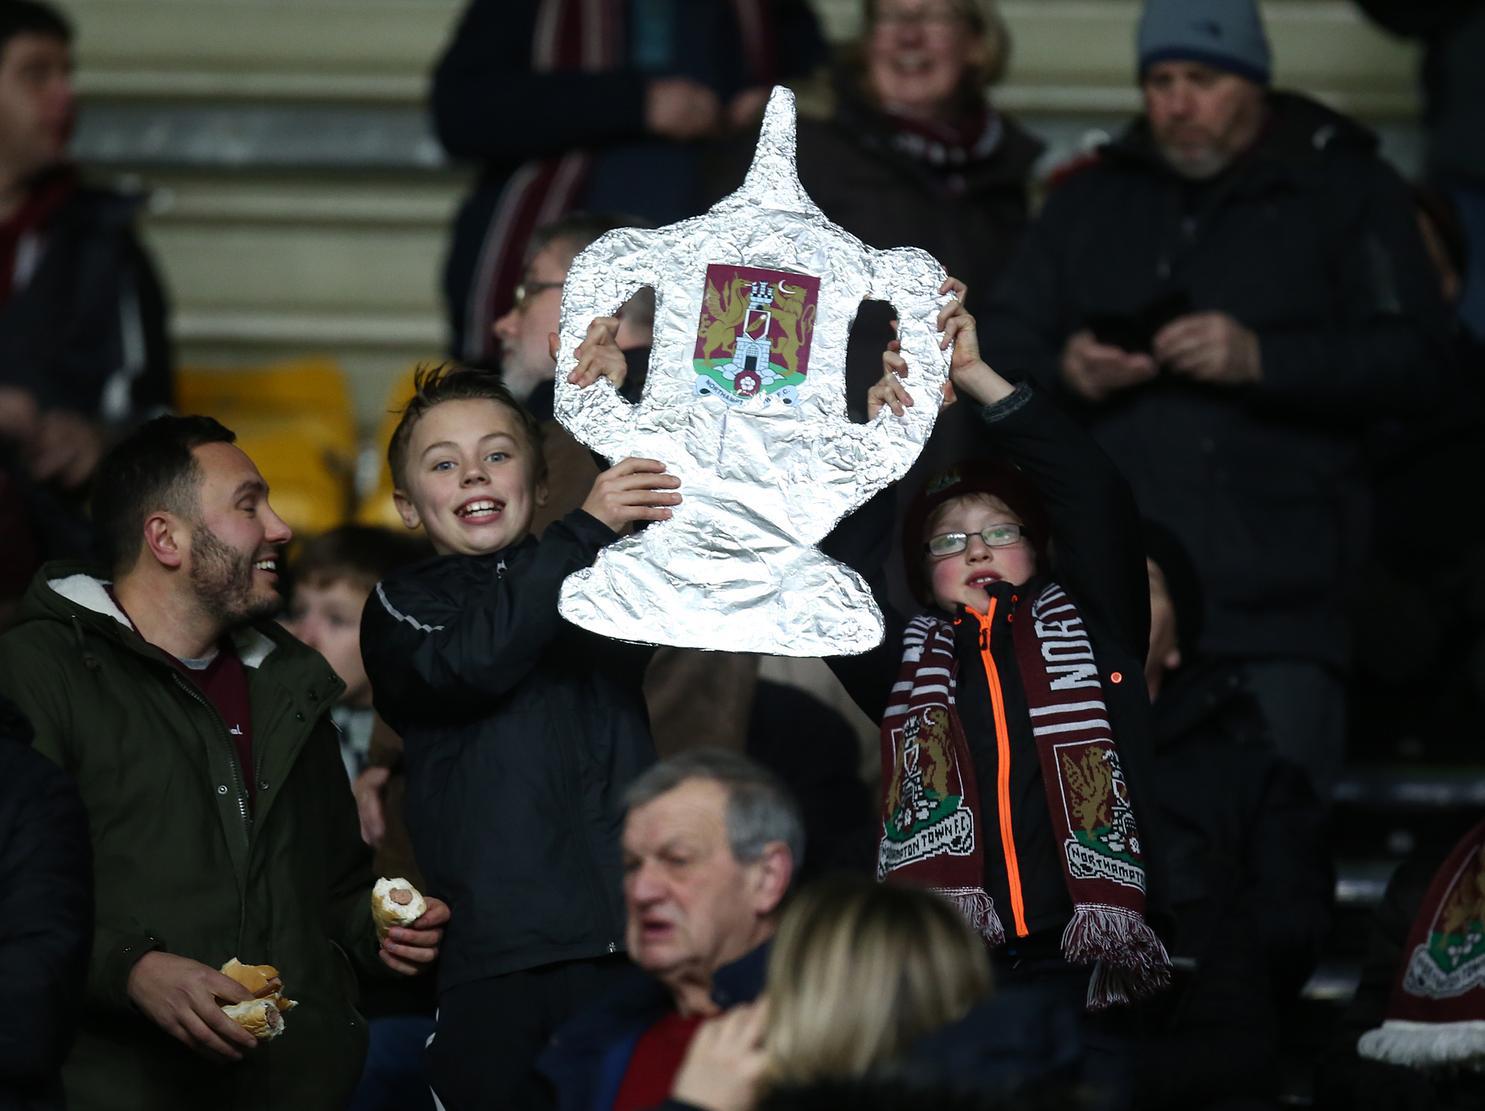 There were plenty of young Cobblers supporters in attendance